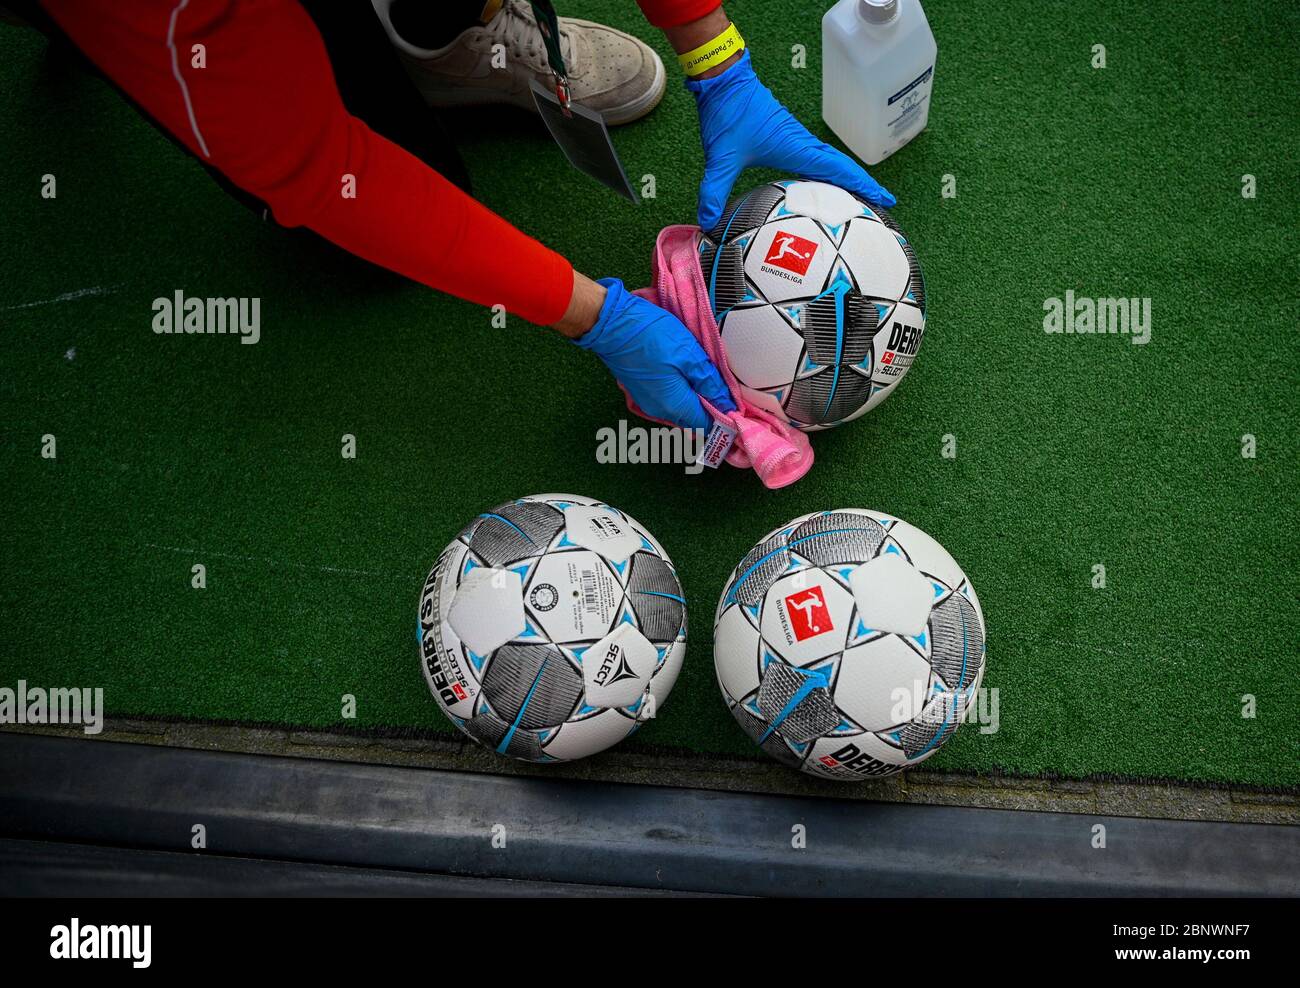 Footballs are disinfected during the Bundesliga soccer match between Duesseldorf and Paderborn in the Merkur Spiel-Arena, Duesseldorf, Germany. Stock Photo